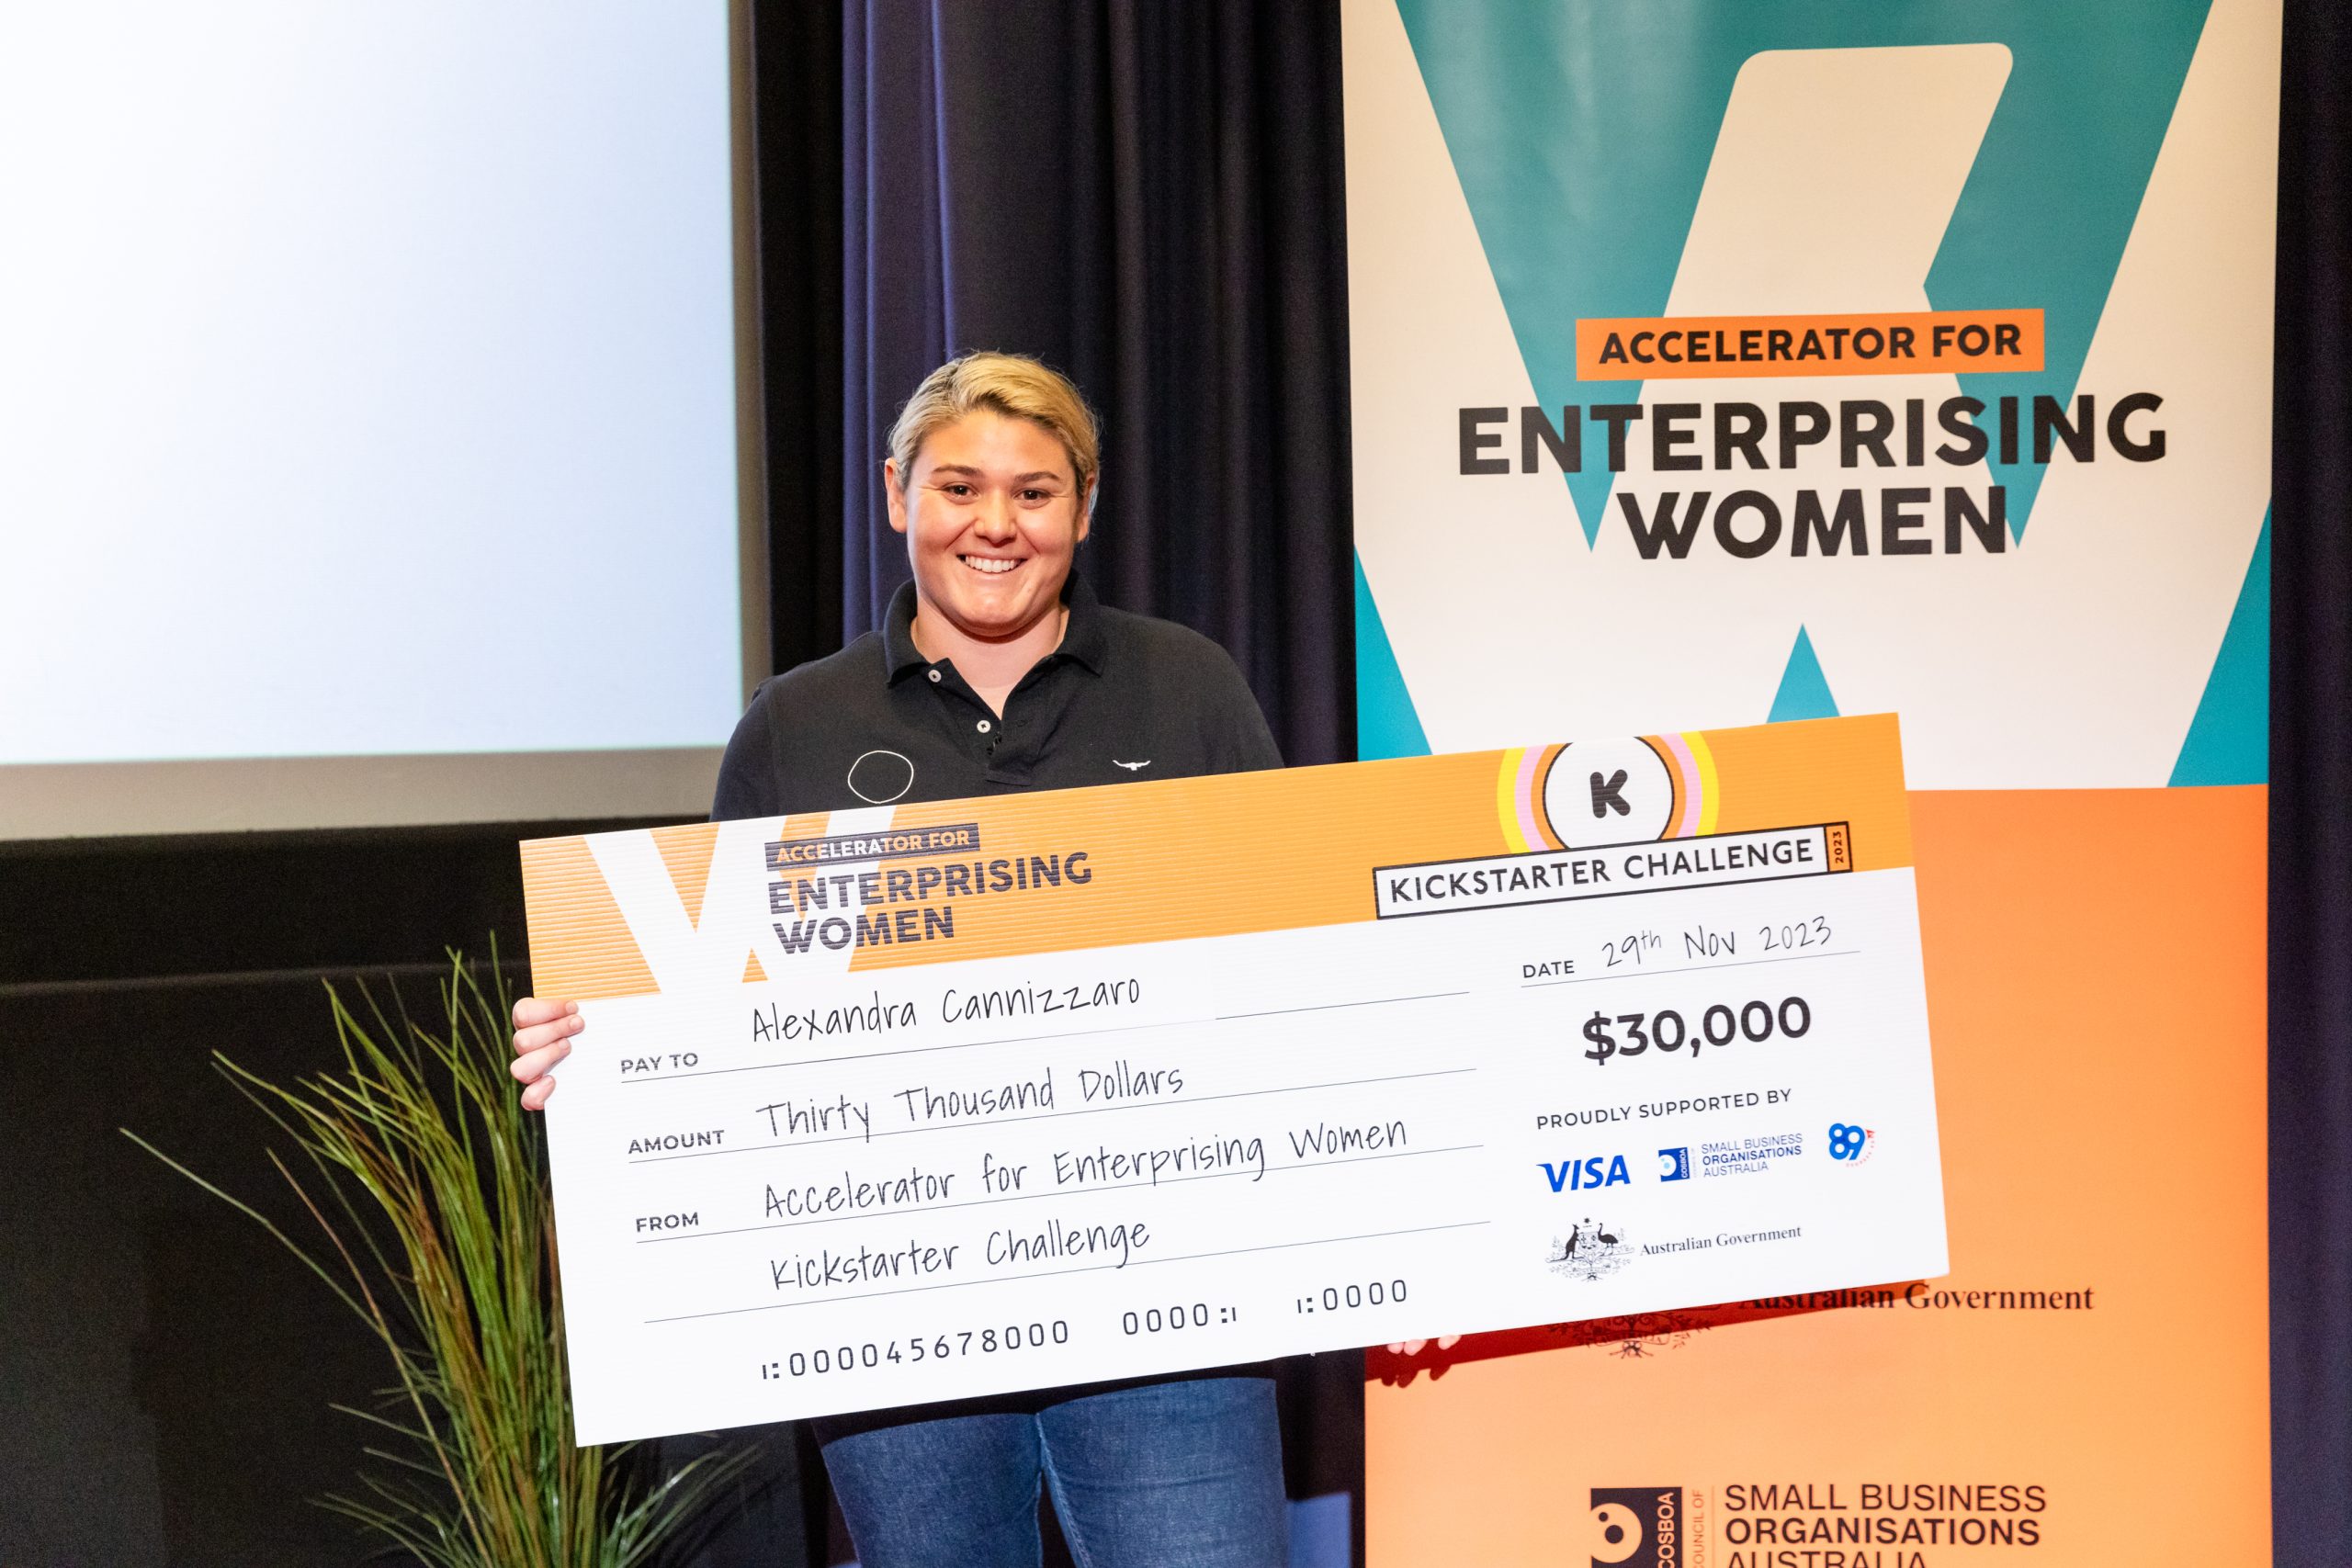 A person stands smiling, holding a large check for thirty thousand dollars. The check is addressed to "Alexandra Cannizzo" from the "Accelerator for Enterprising Women Kickstarter Challenge." The background features a banner with the same text and event branding, celebrating women in business.